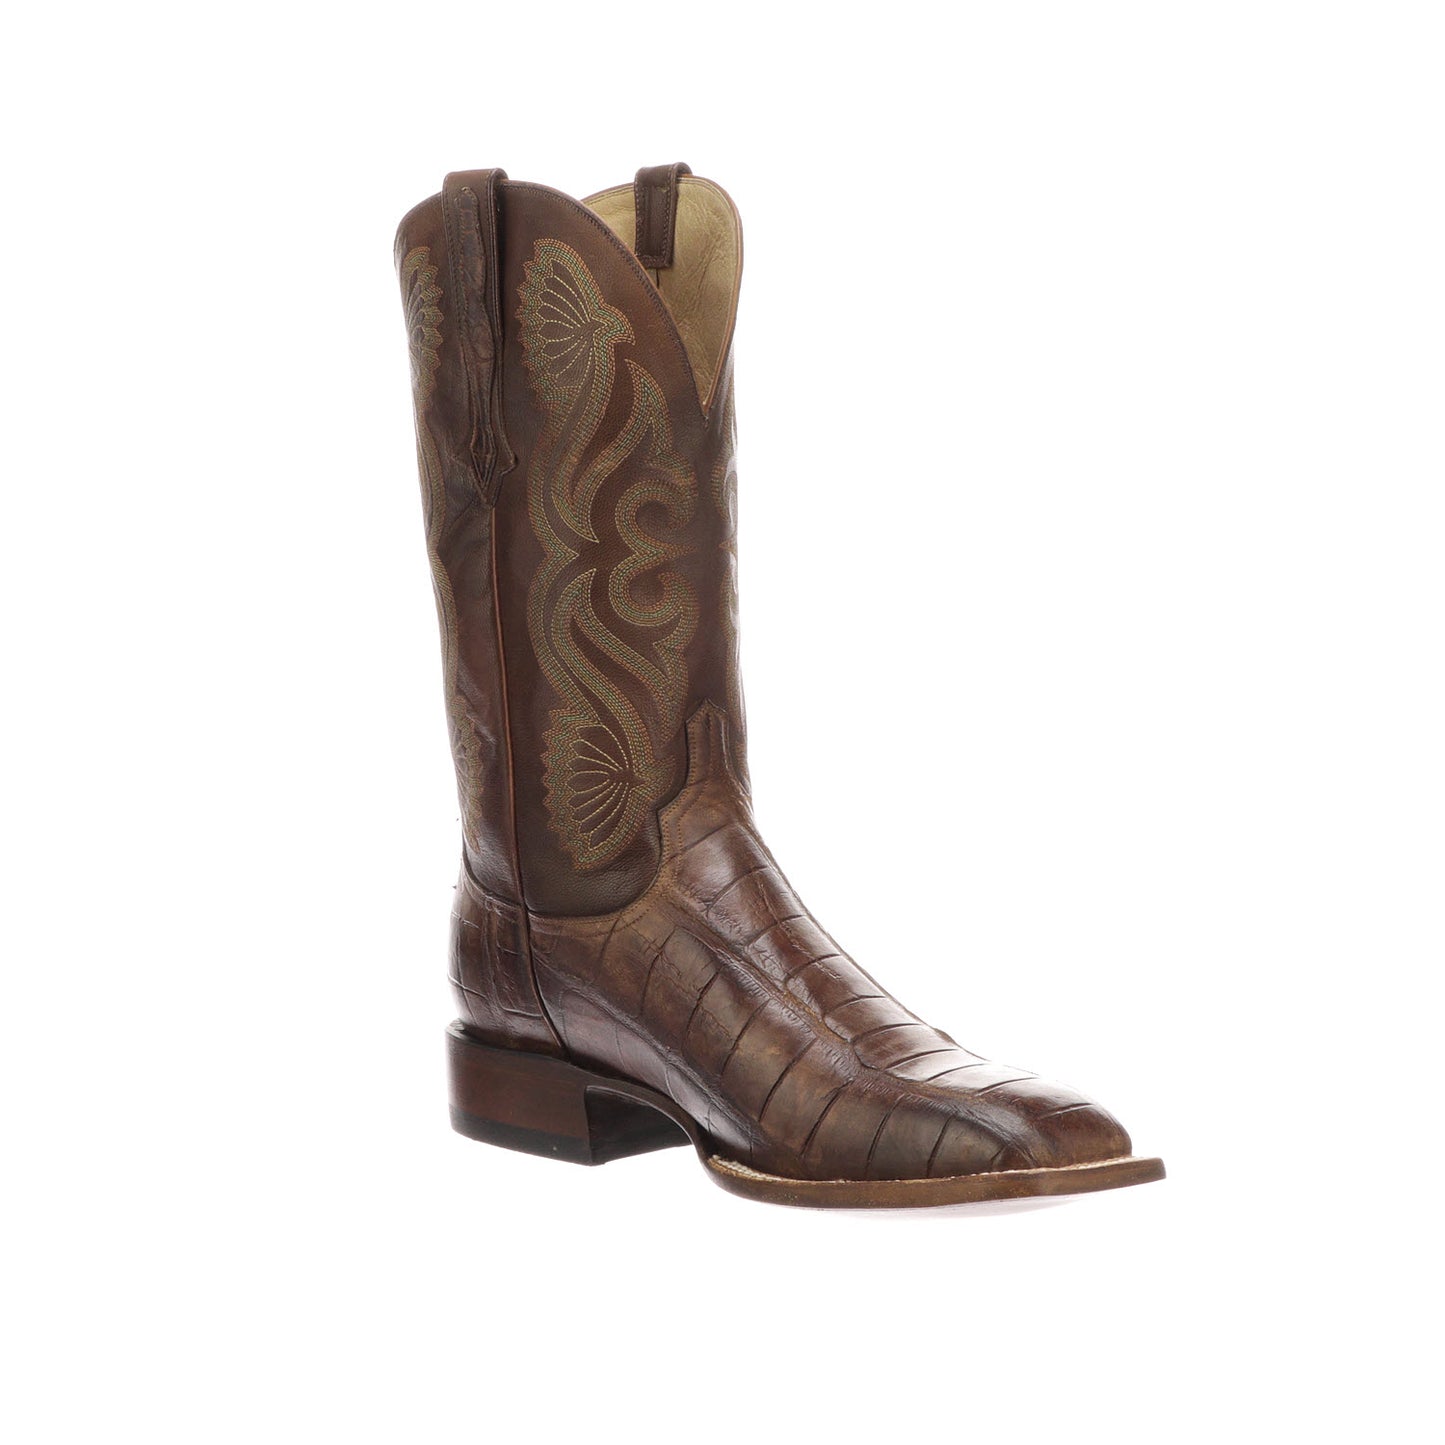 Lucchese Men's Roy Boot - Brown